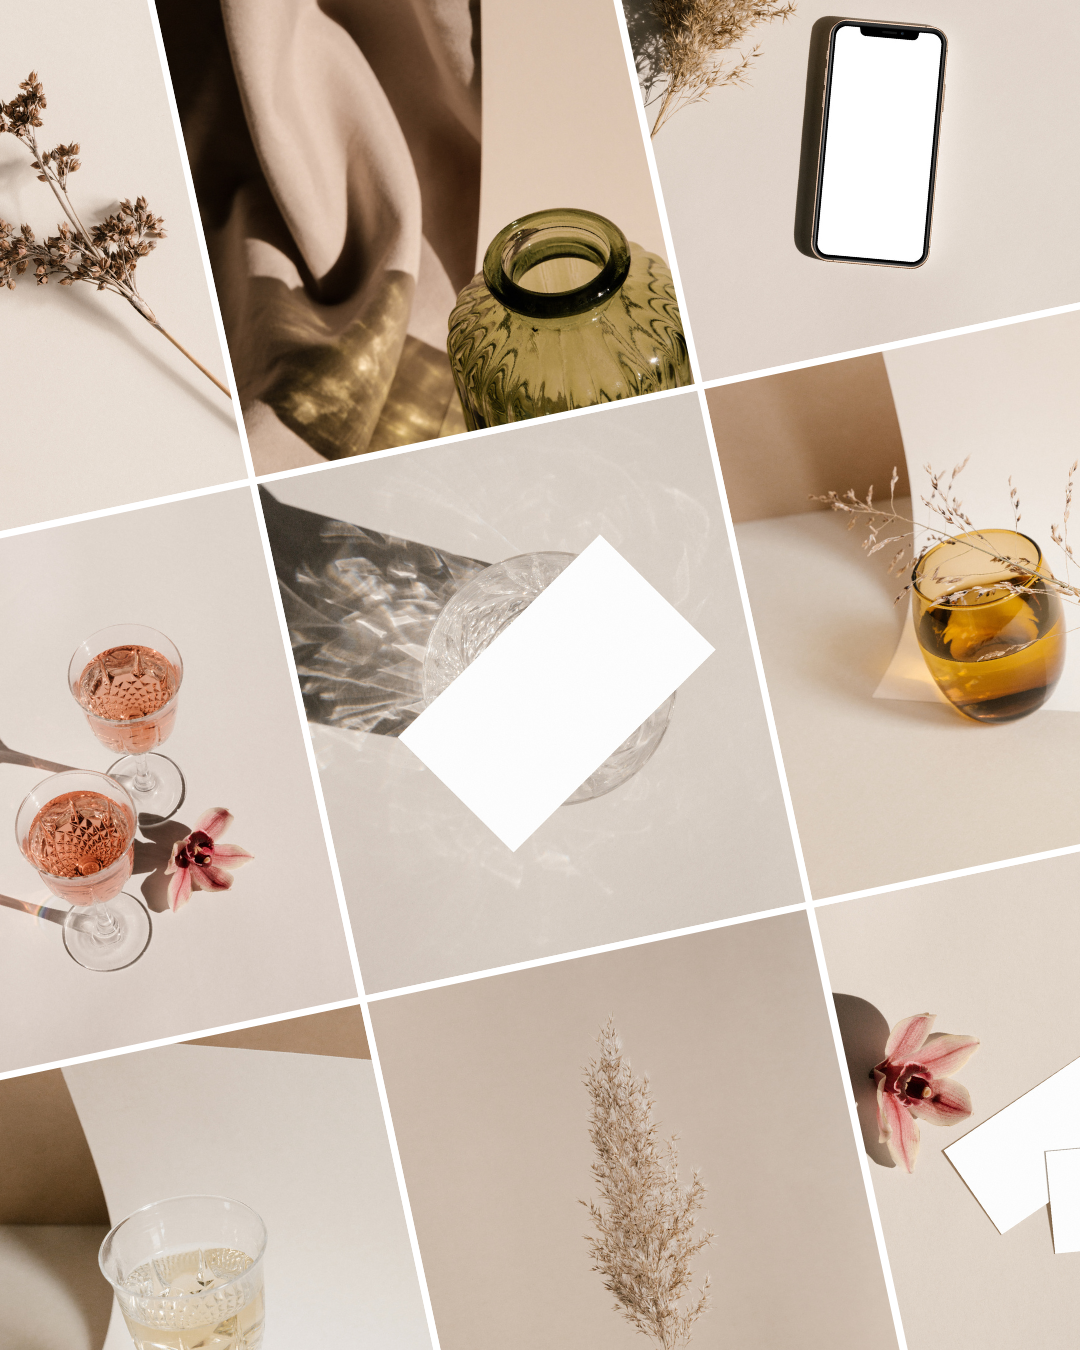 Collage of stock images for Rosa collection by Moyo Studio, featuring images for iPhone and business cards mockups as well as editorial celebration images for event planners.